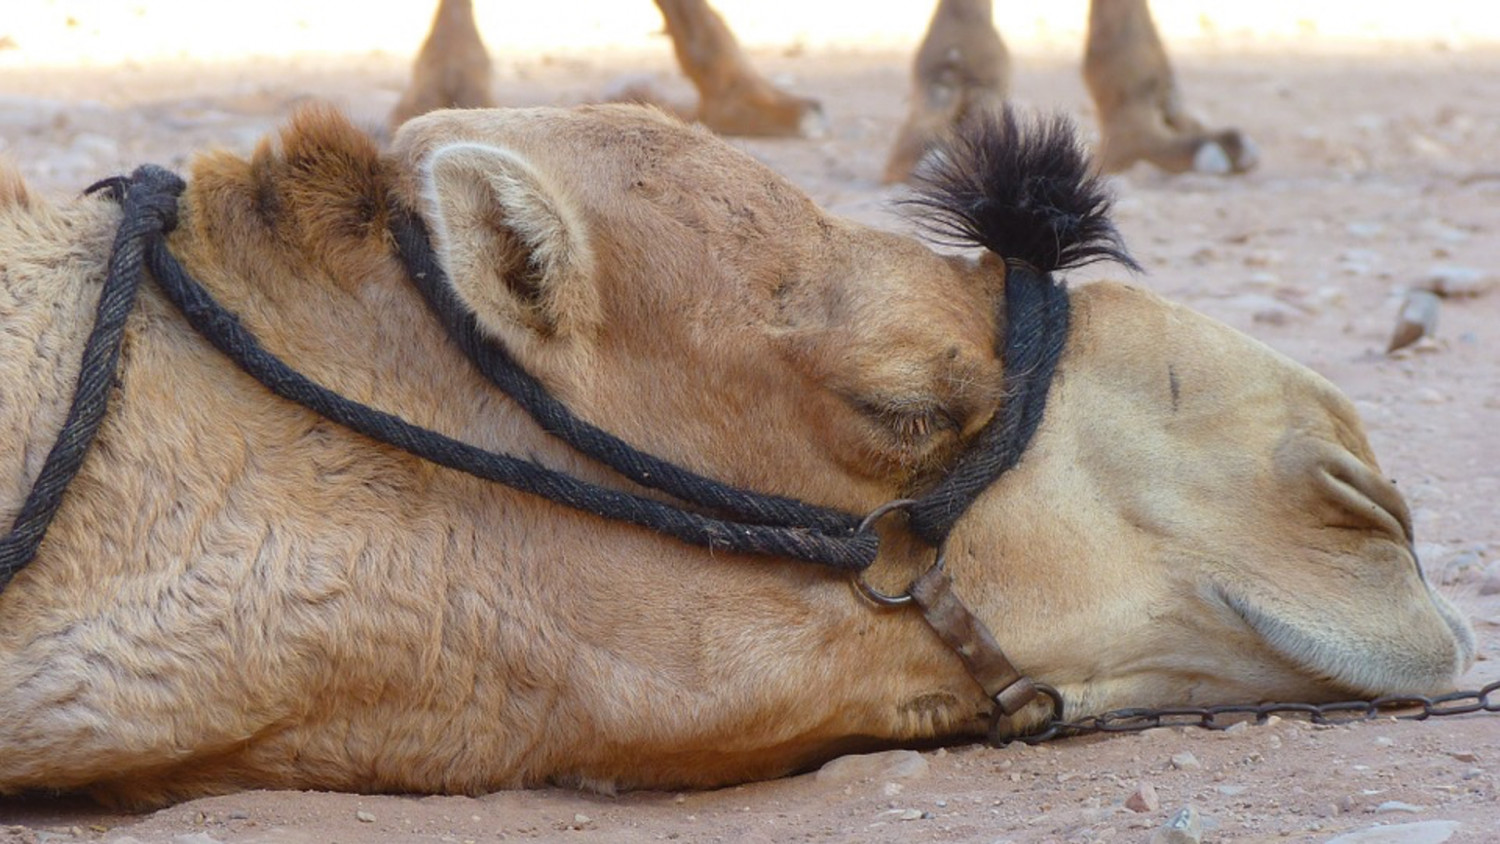 Sad Camel Stops Taking Food and Water After Caretaker Cop Died of Heart Attack